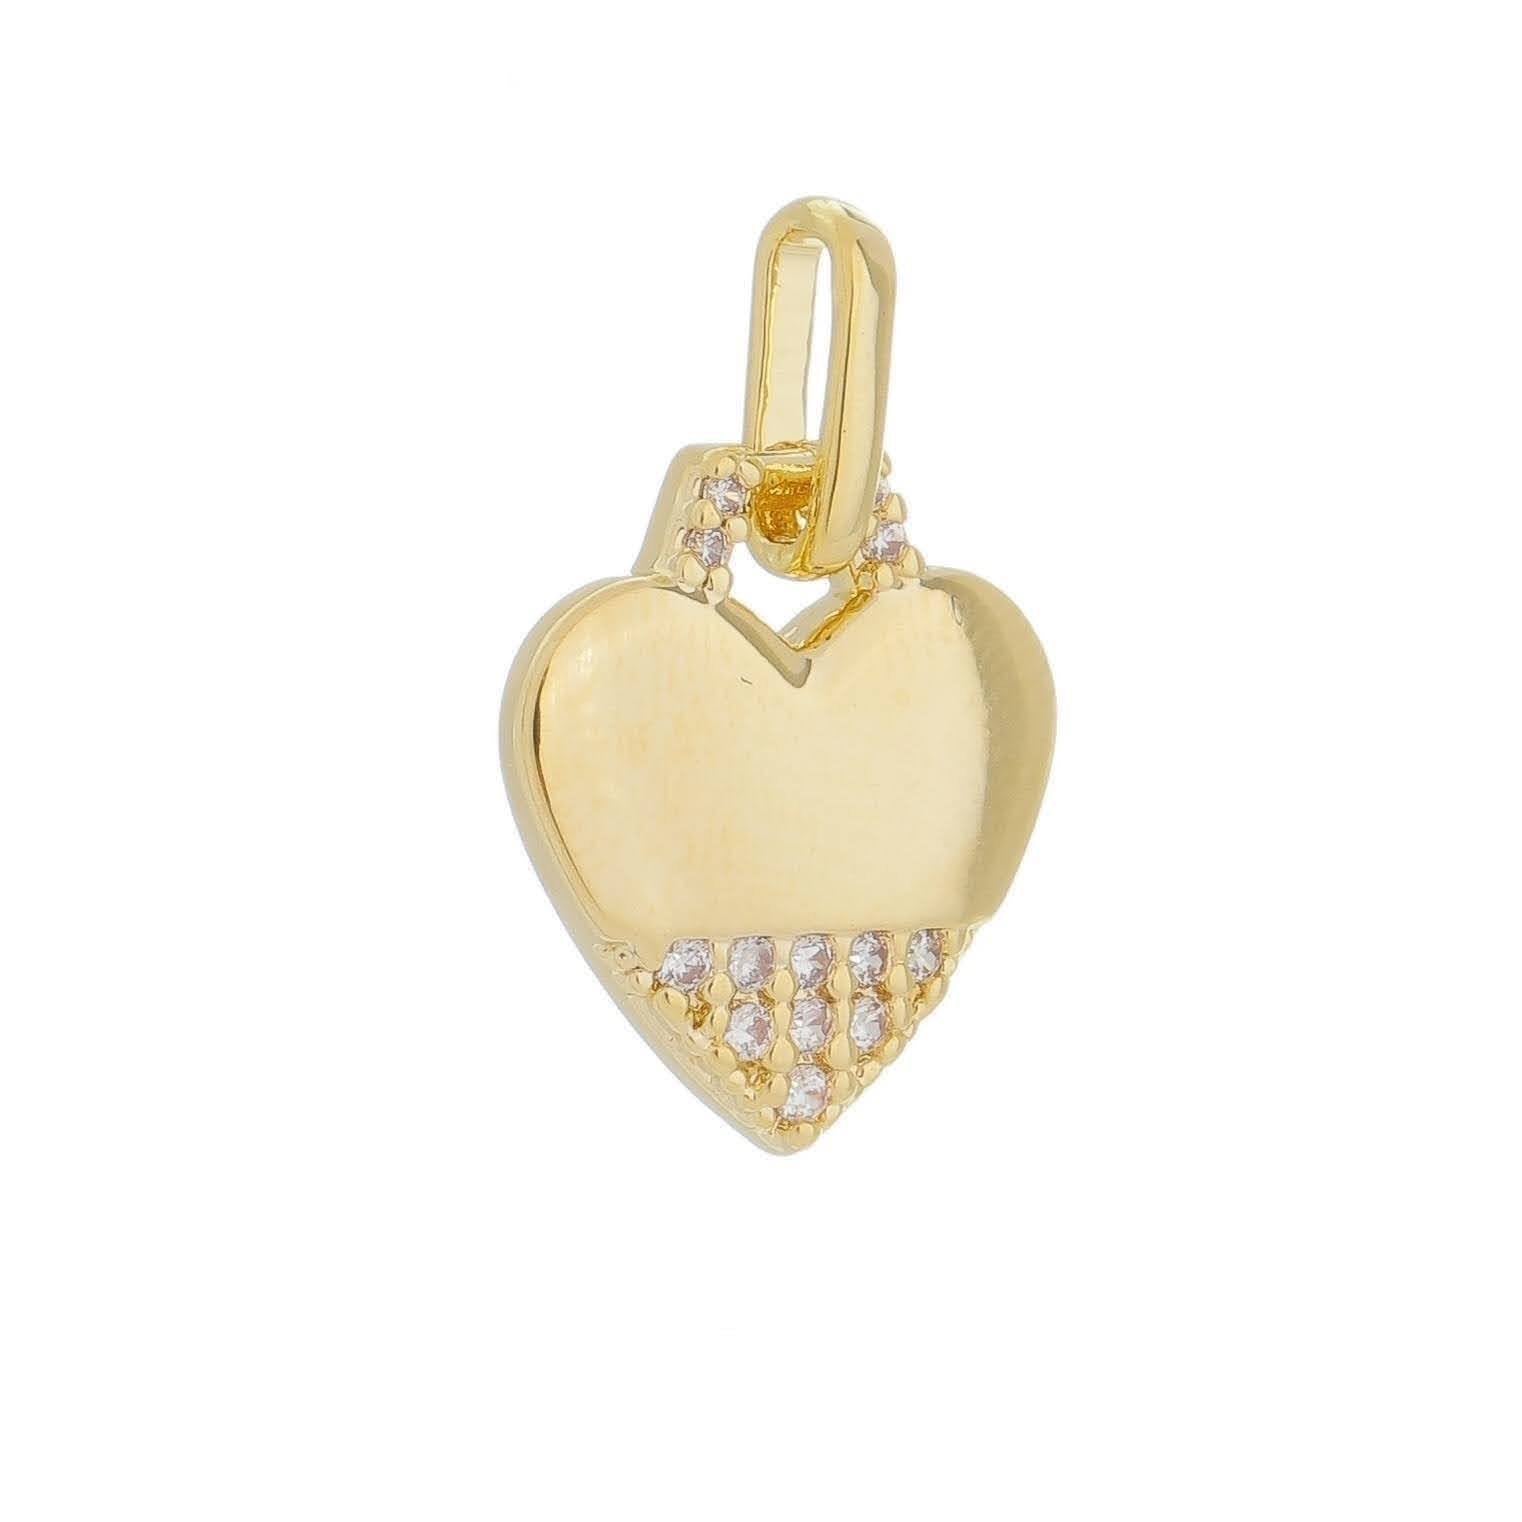 GoldFi 18k Gold Filled Heart Pendant With Cubic Zirconia Stones